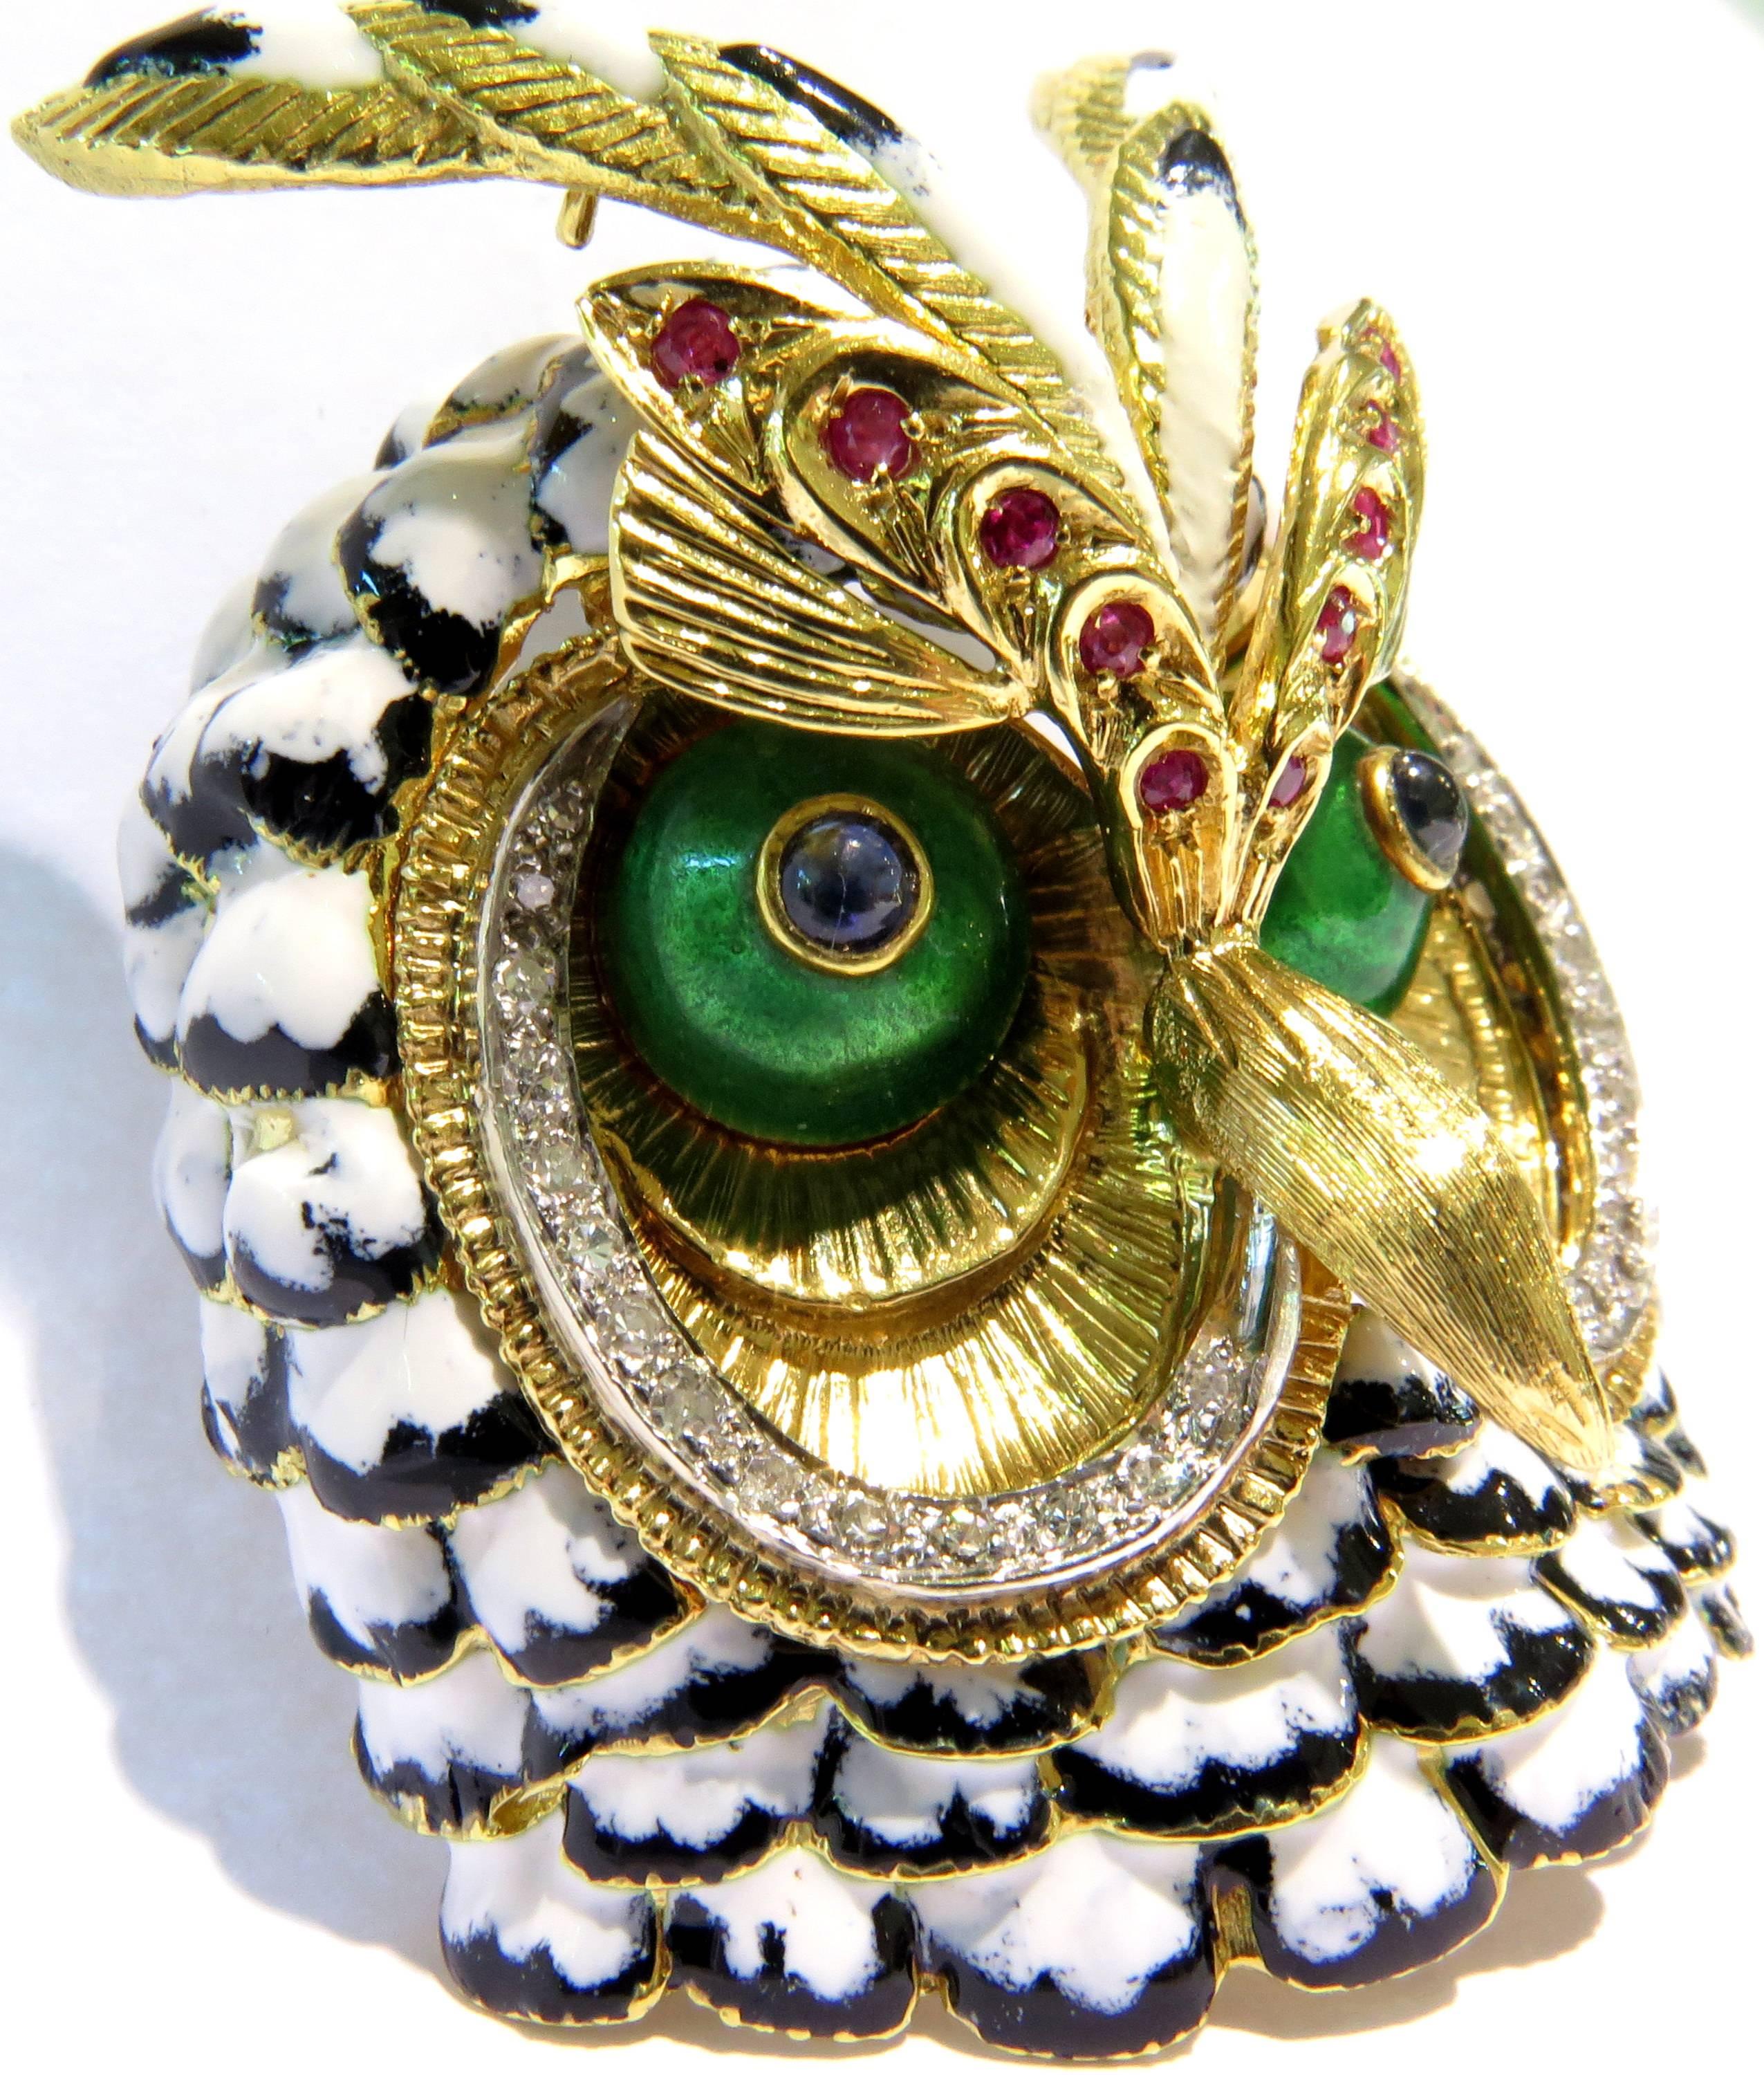 WHOOOO says there is a cuter owl than this???? I don't think so!
So beautifully detailed, you will admire it at any angle. This 18K owl pin is made to be a large brooch or a scarf pin. Either way you choose to wear this pin, you are sure to get